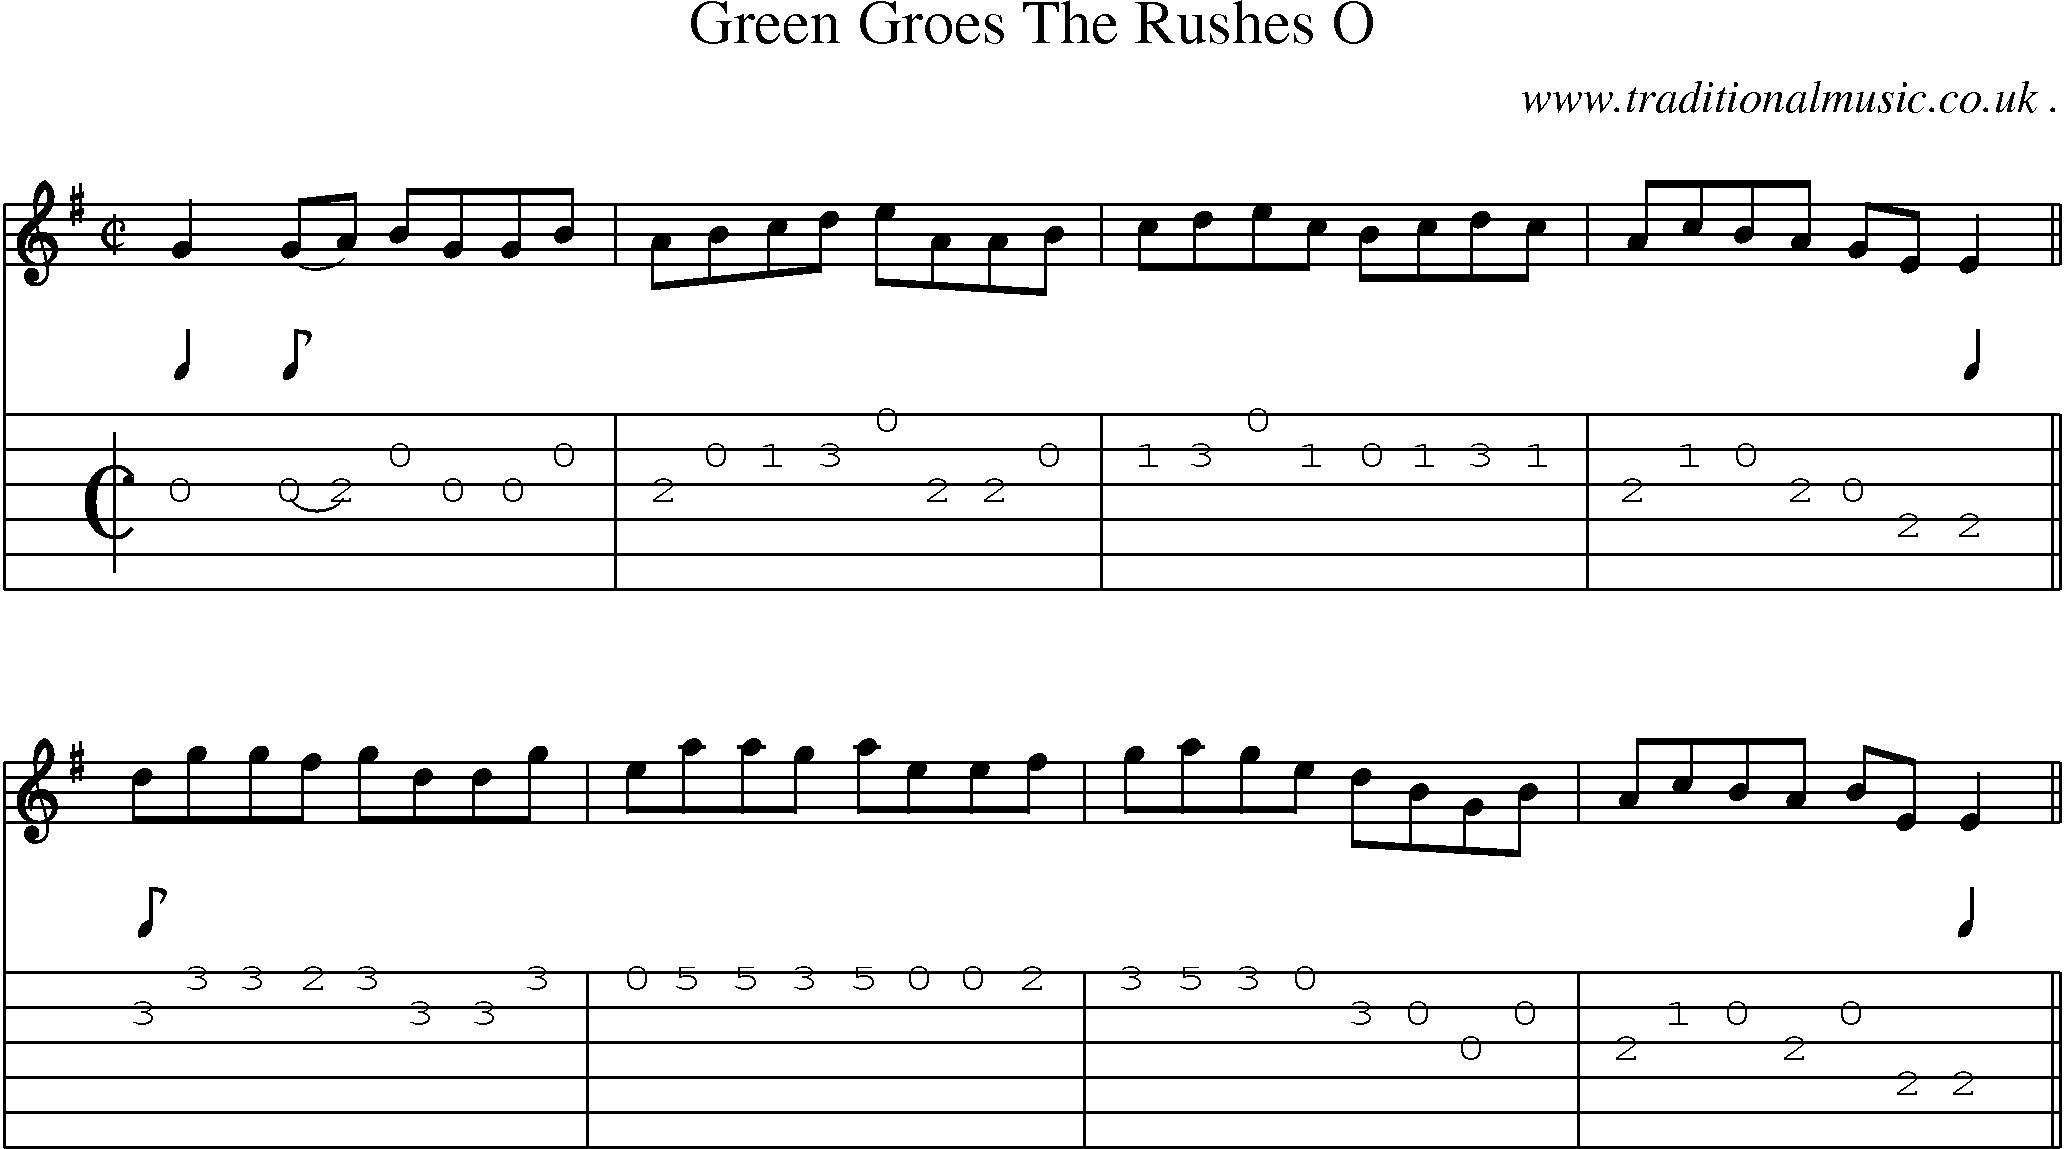 Sheet-Music and Guitar Tabs for Green Groes The Rushes O